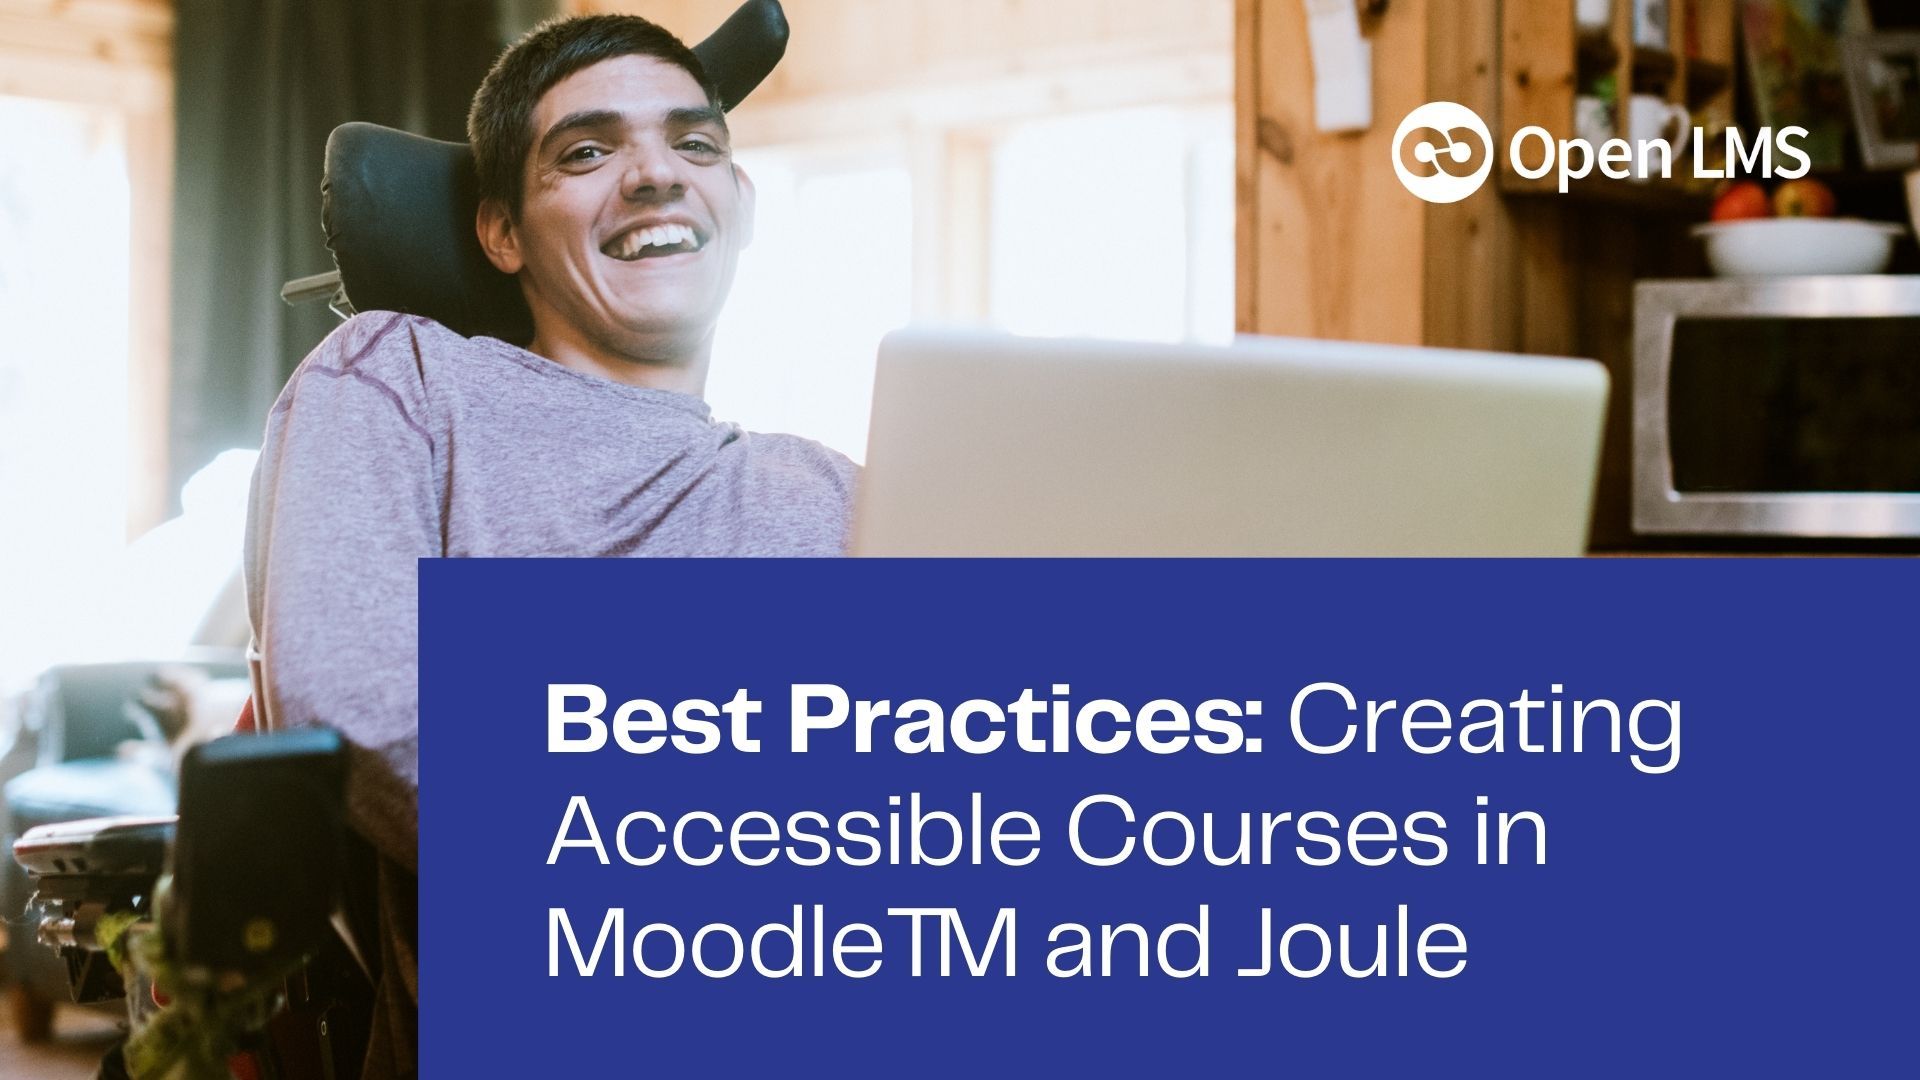 Best practices: Creating accessible courses in Moodle™ and Joule